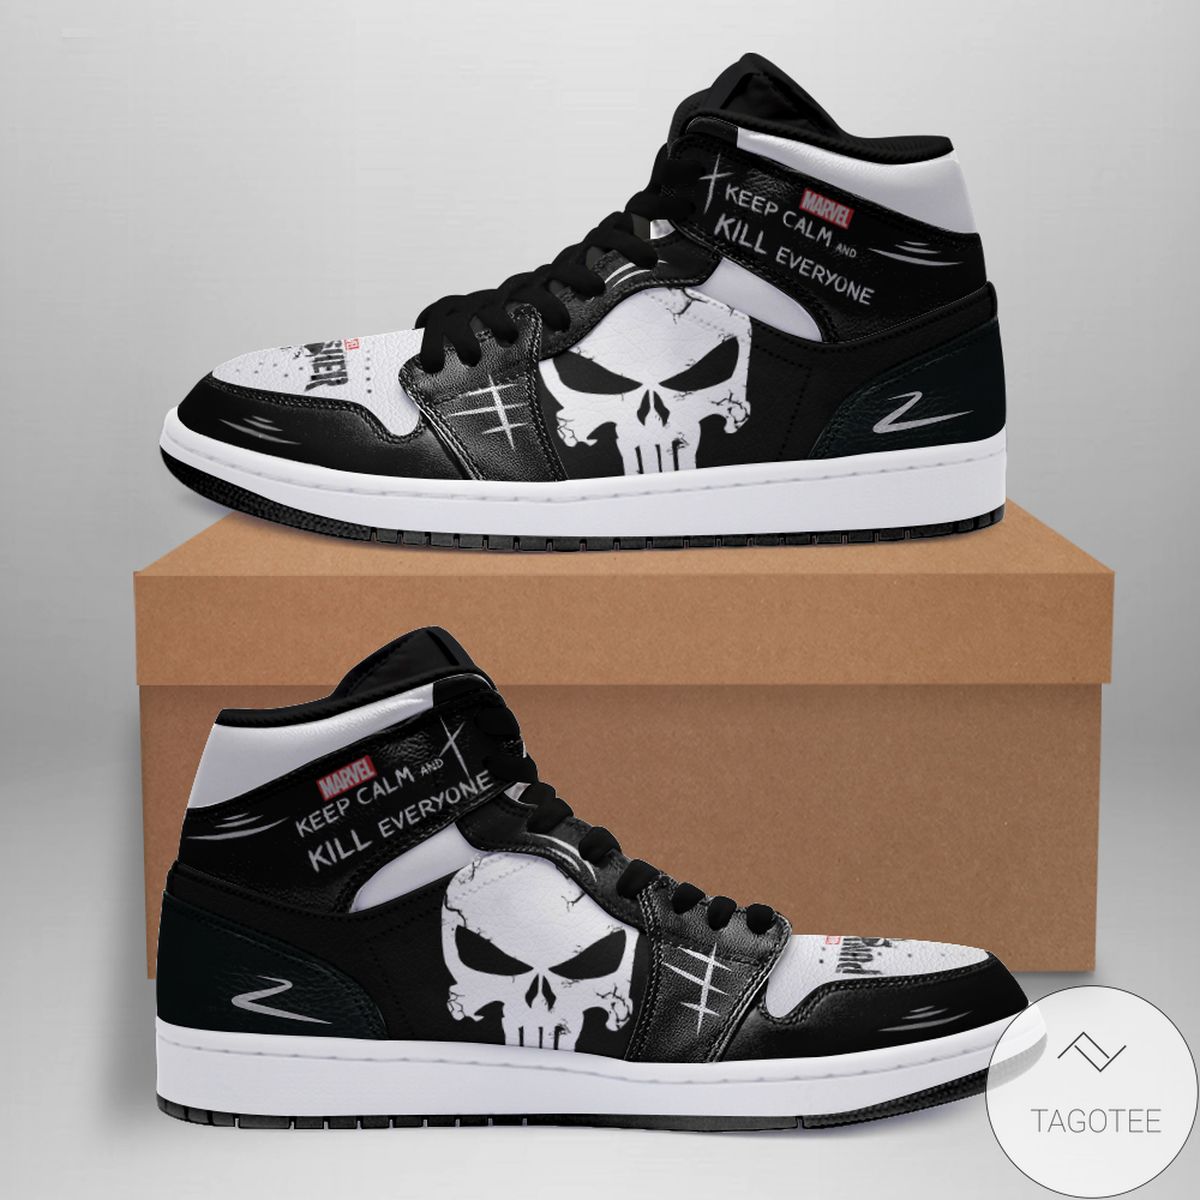 Personalized Punisher Air Jordan High Top Shoes